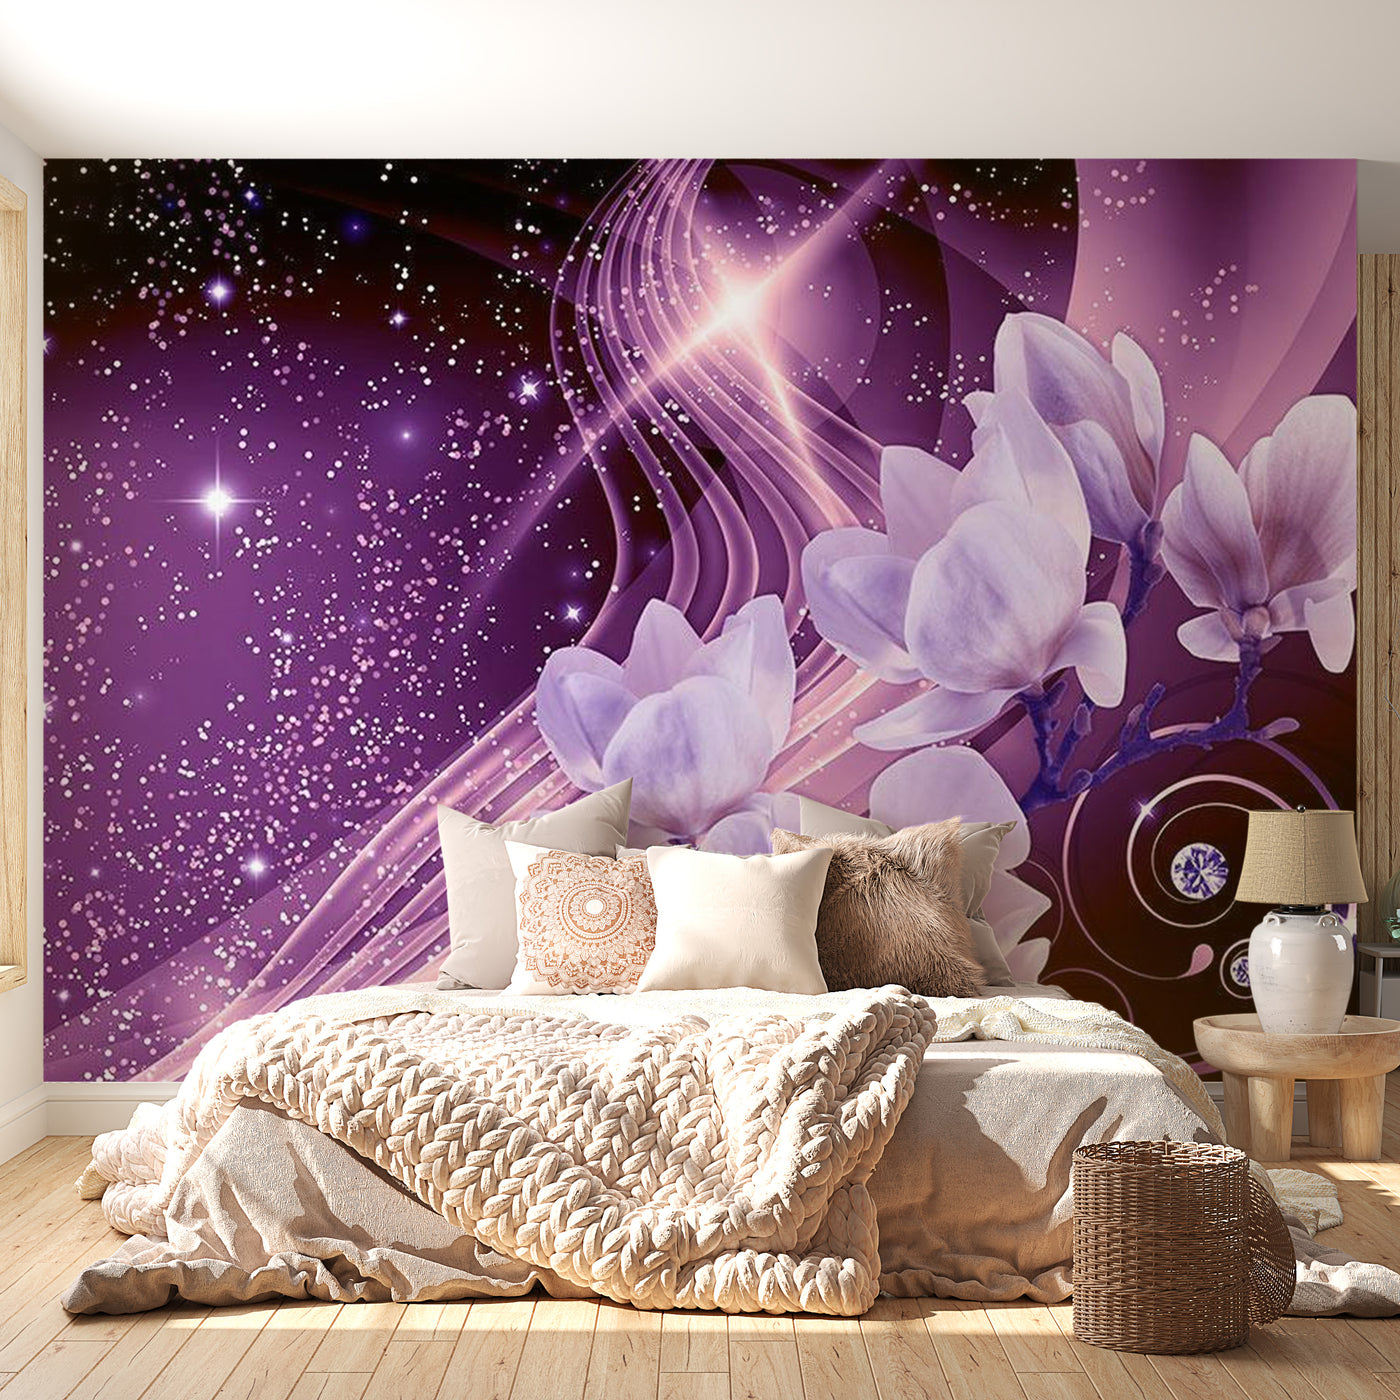 Peel & Stick Floral Wall Mural - Purple Milky Way - Removable Wall Decals